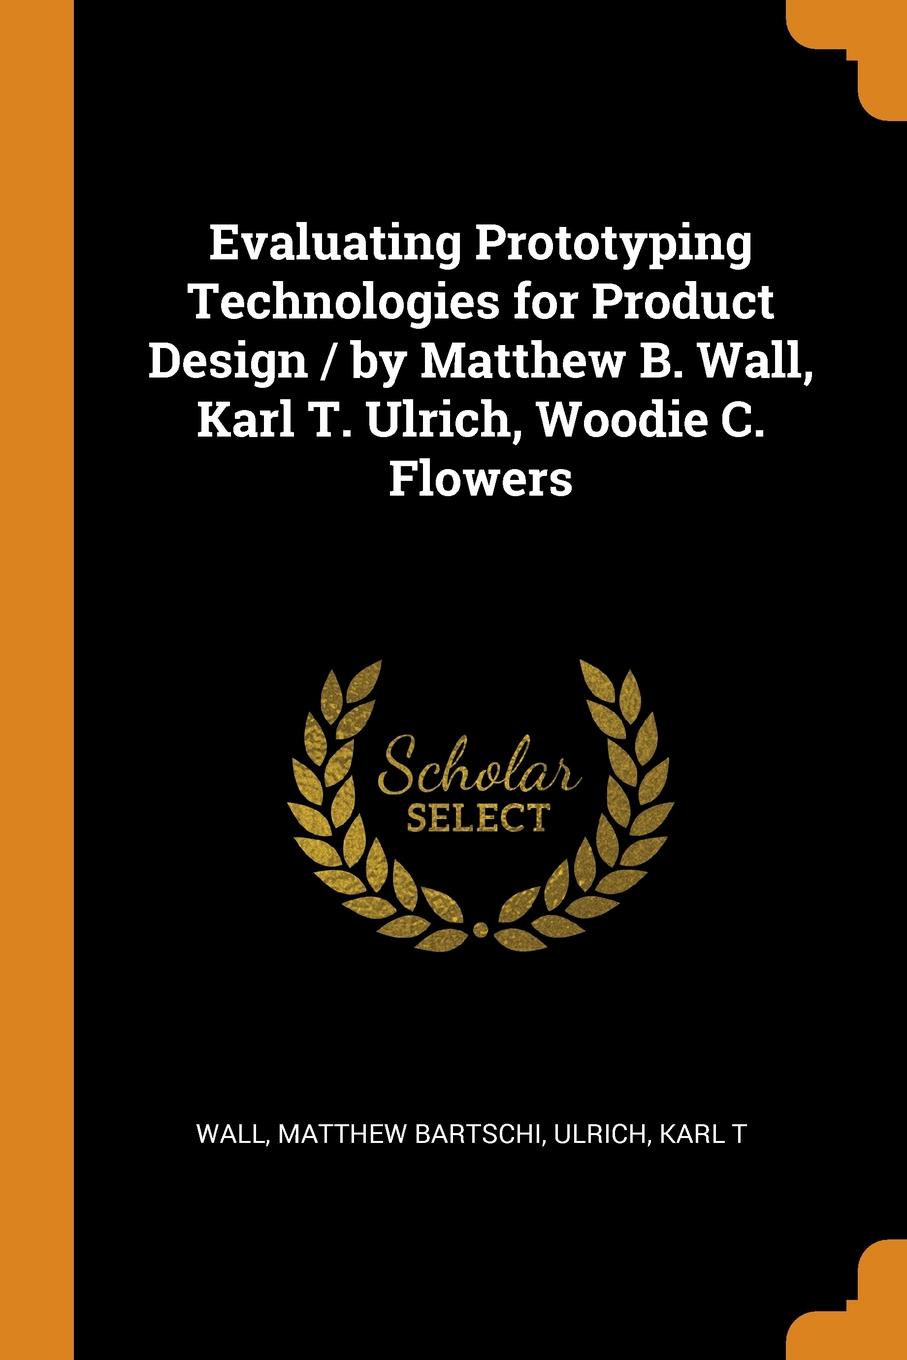 Evaluating Prototyping Technologies for Product Design / by Matthew B. Wall, Karl T. Ulrich, Woodie C. Flowers